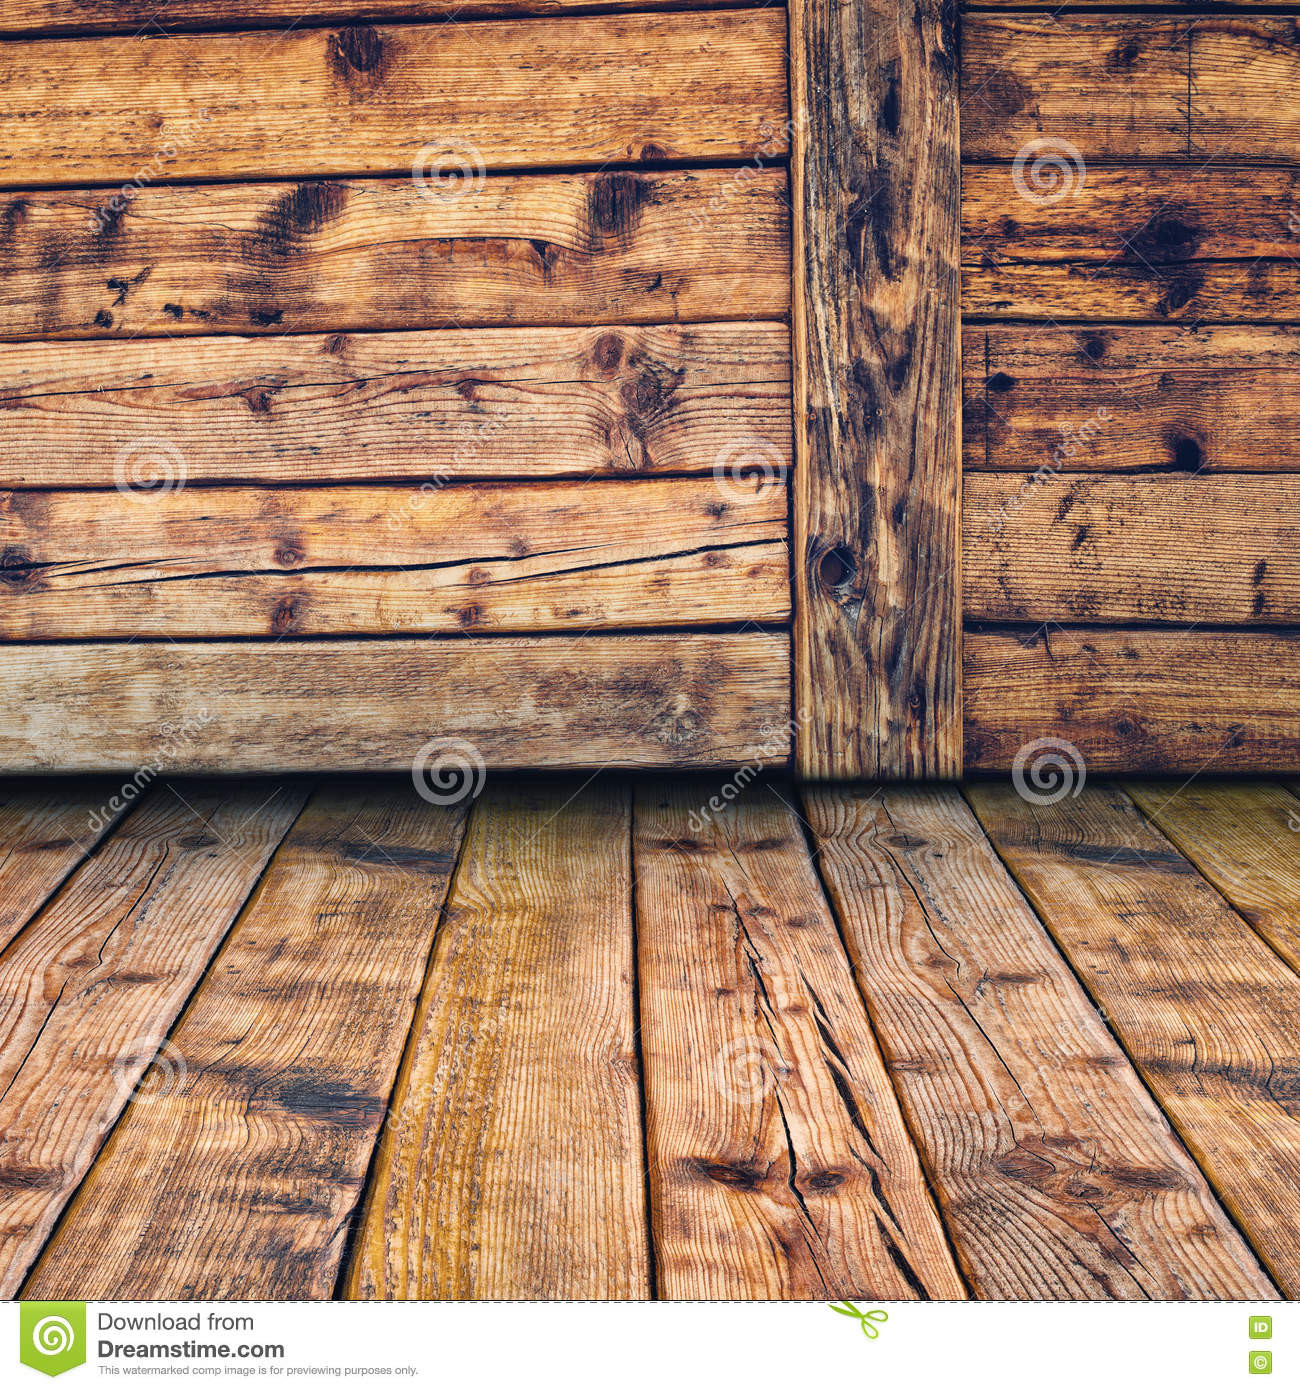 12 Fantastic Using Hardwood Flooring On Walls 2024 free download using hardwood flooring on walls of wooden 3d room interior for product placement stock image image of regarding wooden 3d room interior for product placement